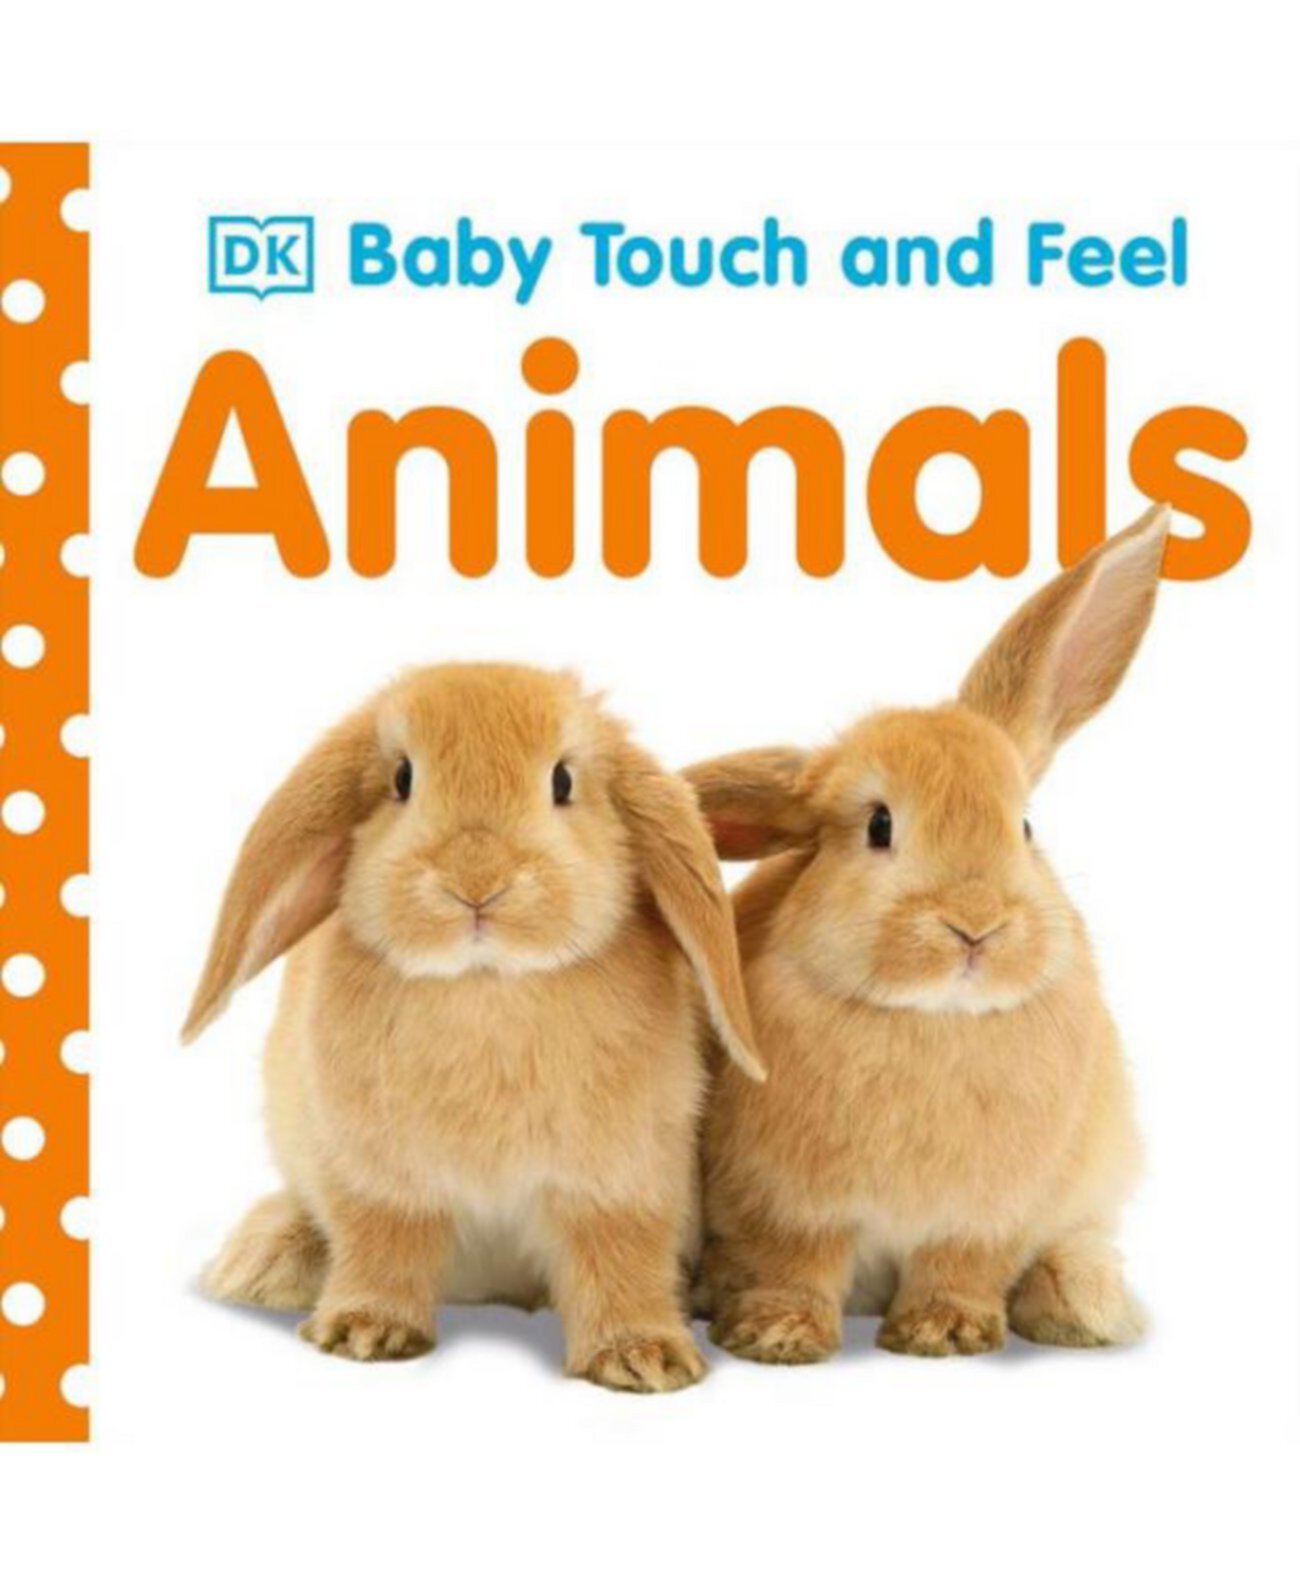 Touch animals. Baby Touch and feel animals. First Words Baby Touch and feel. Baby Touch and feel dk. Baby Touch and feel. Puppies.